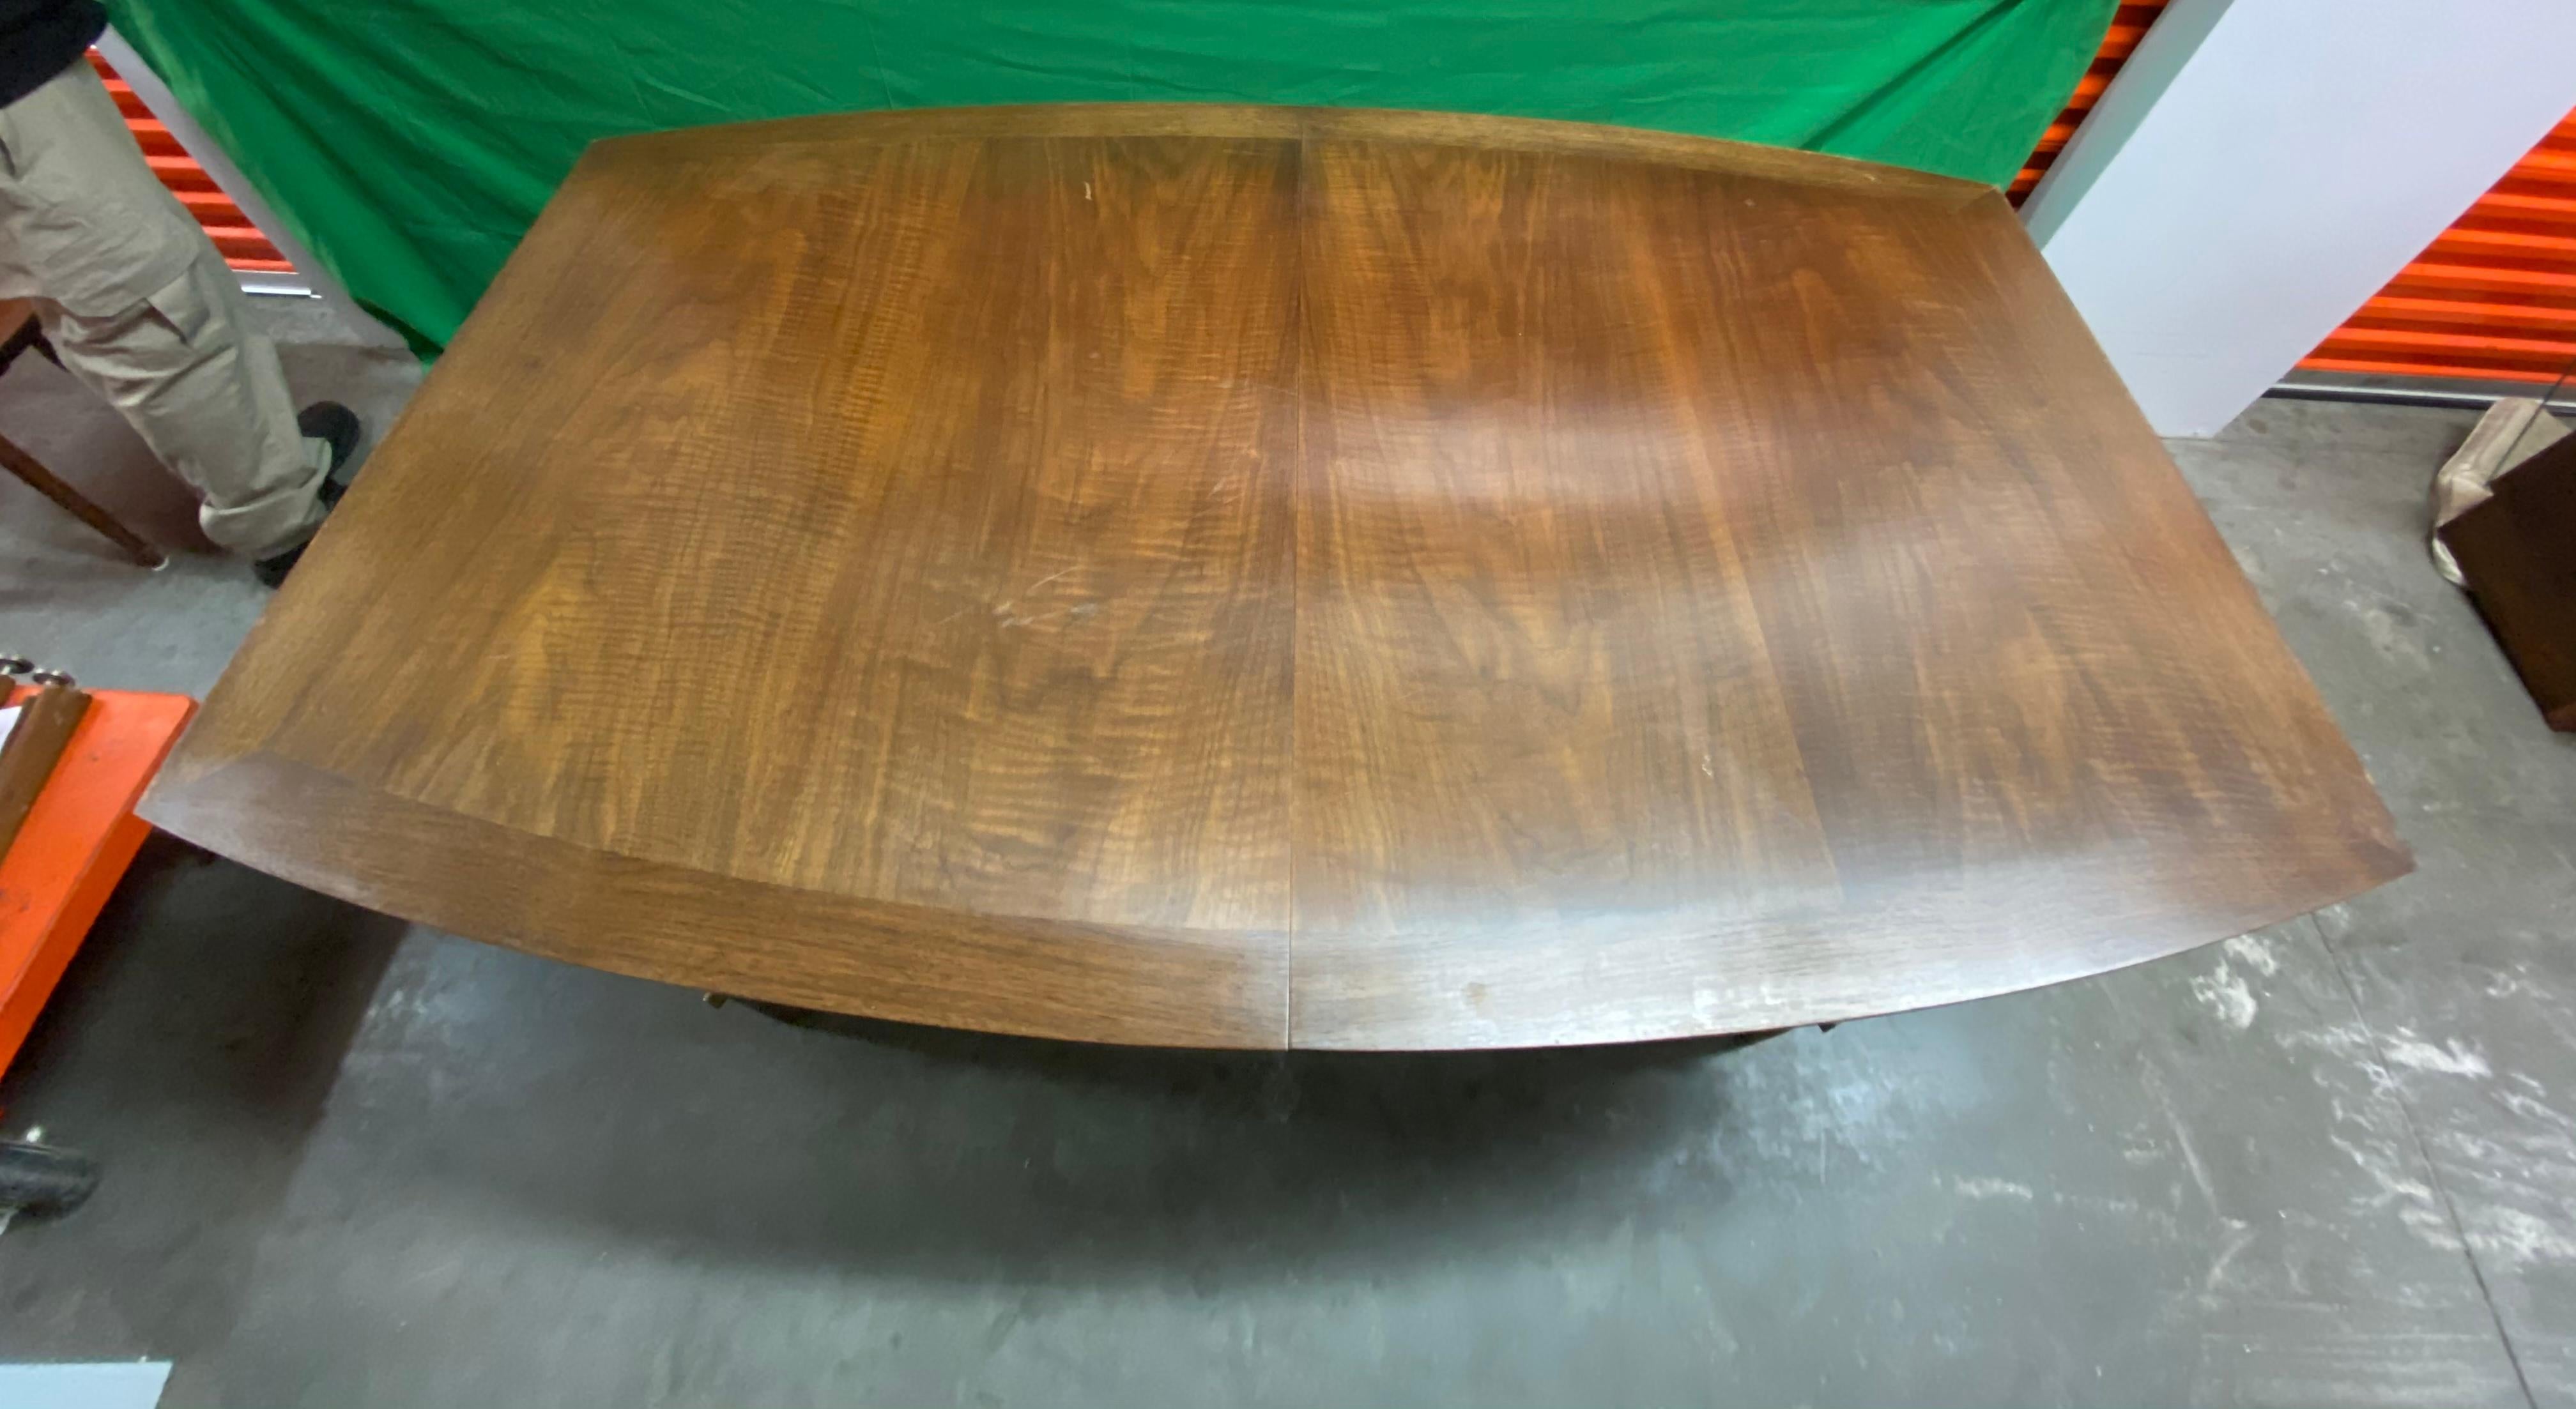 Bert England Mid-Century Modern walnut and brass dining table with curved shape. Designed by Bert England for Johnson Furniture. The table top is made of walnut with a flush walnut border and has a curved boat shape. The table top is supported by